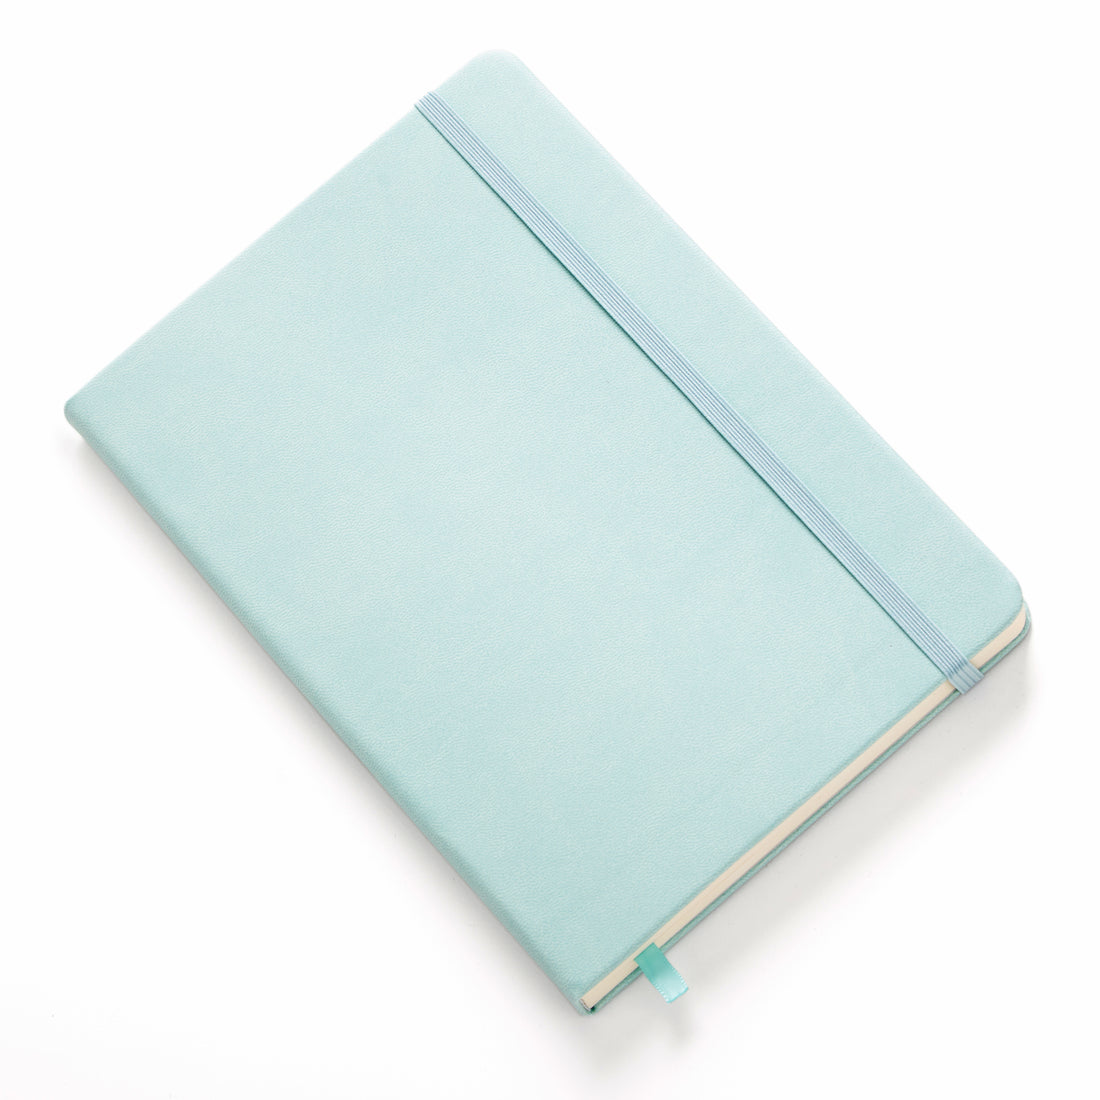 Practical Tips for Maintaining a Gratitude Journal